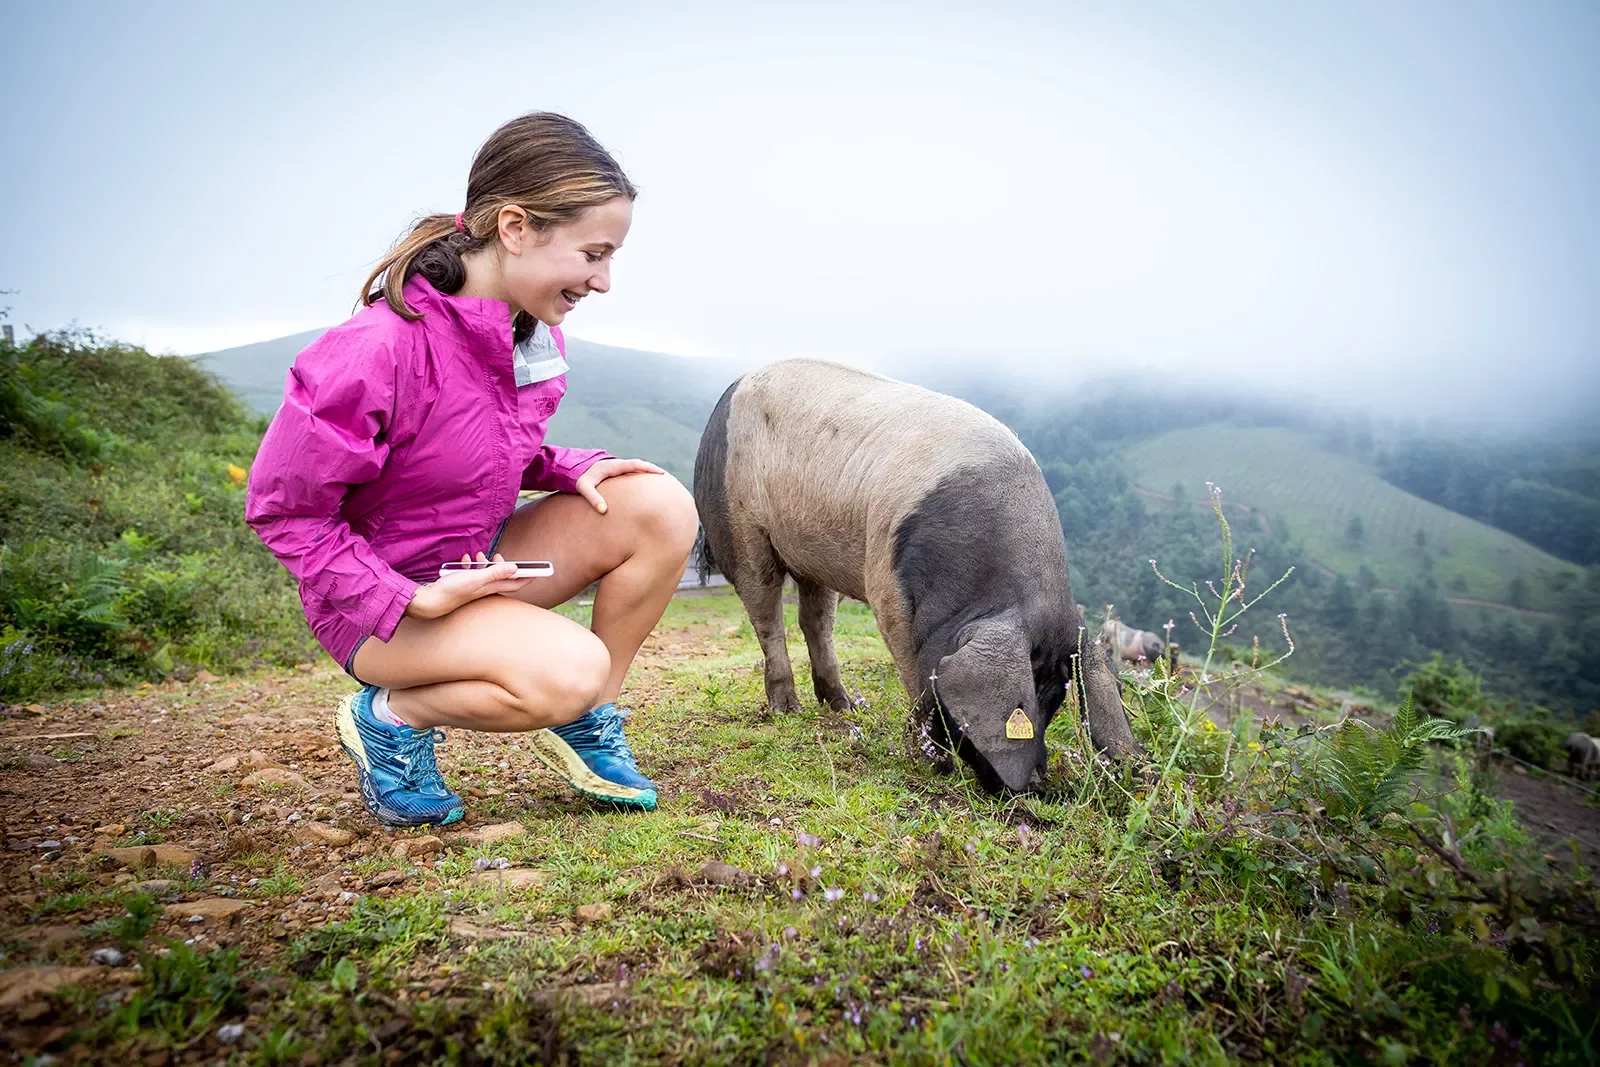 Young guest crouching on hilltop with pig.